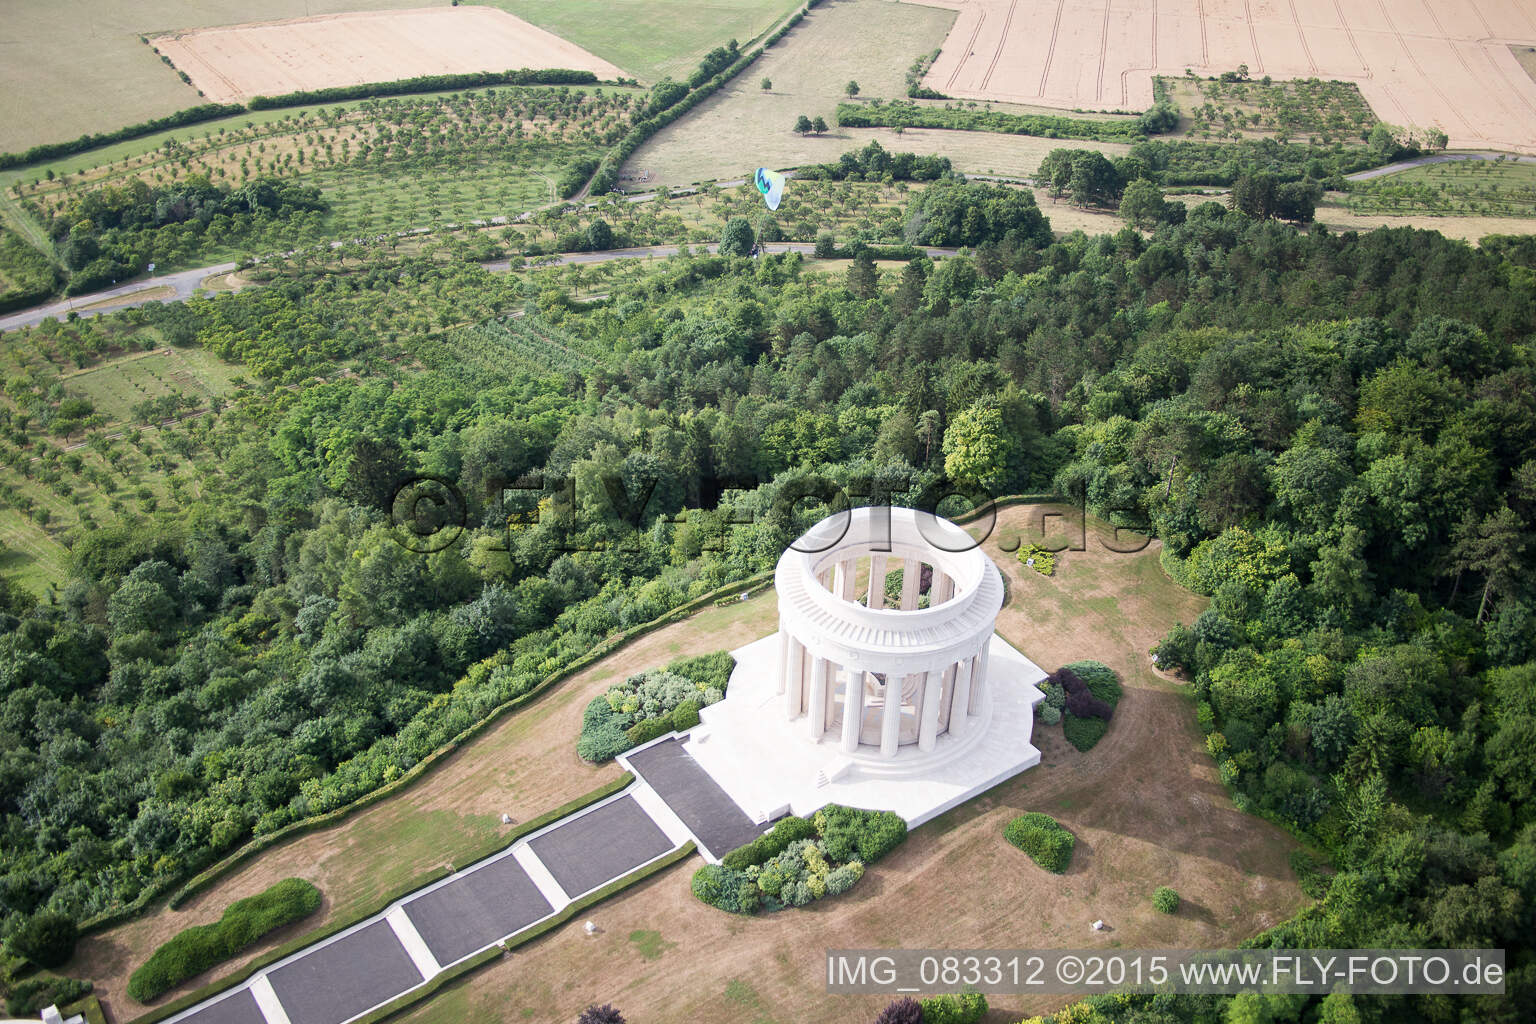 Drone recording of American War Memorial in Montsec in the state Meuse, France